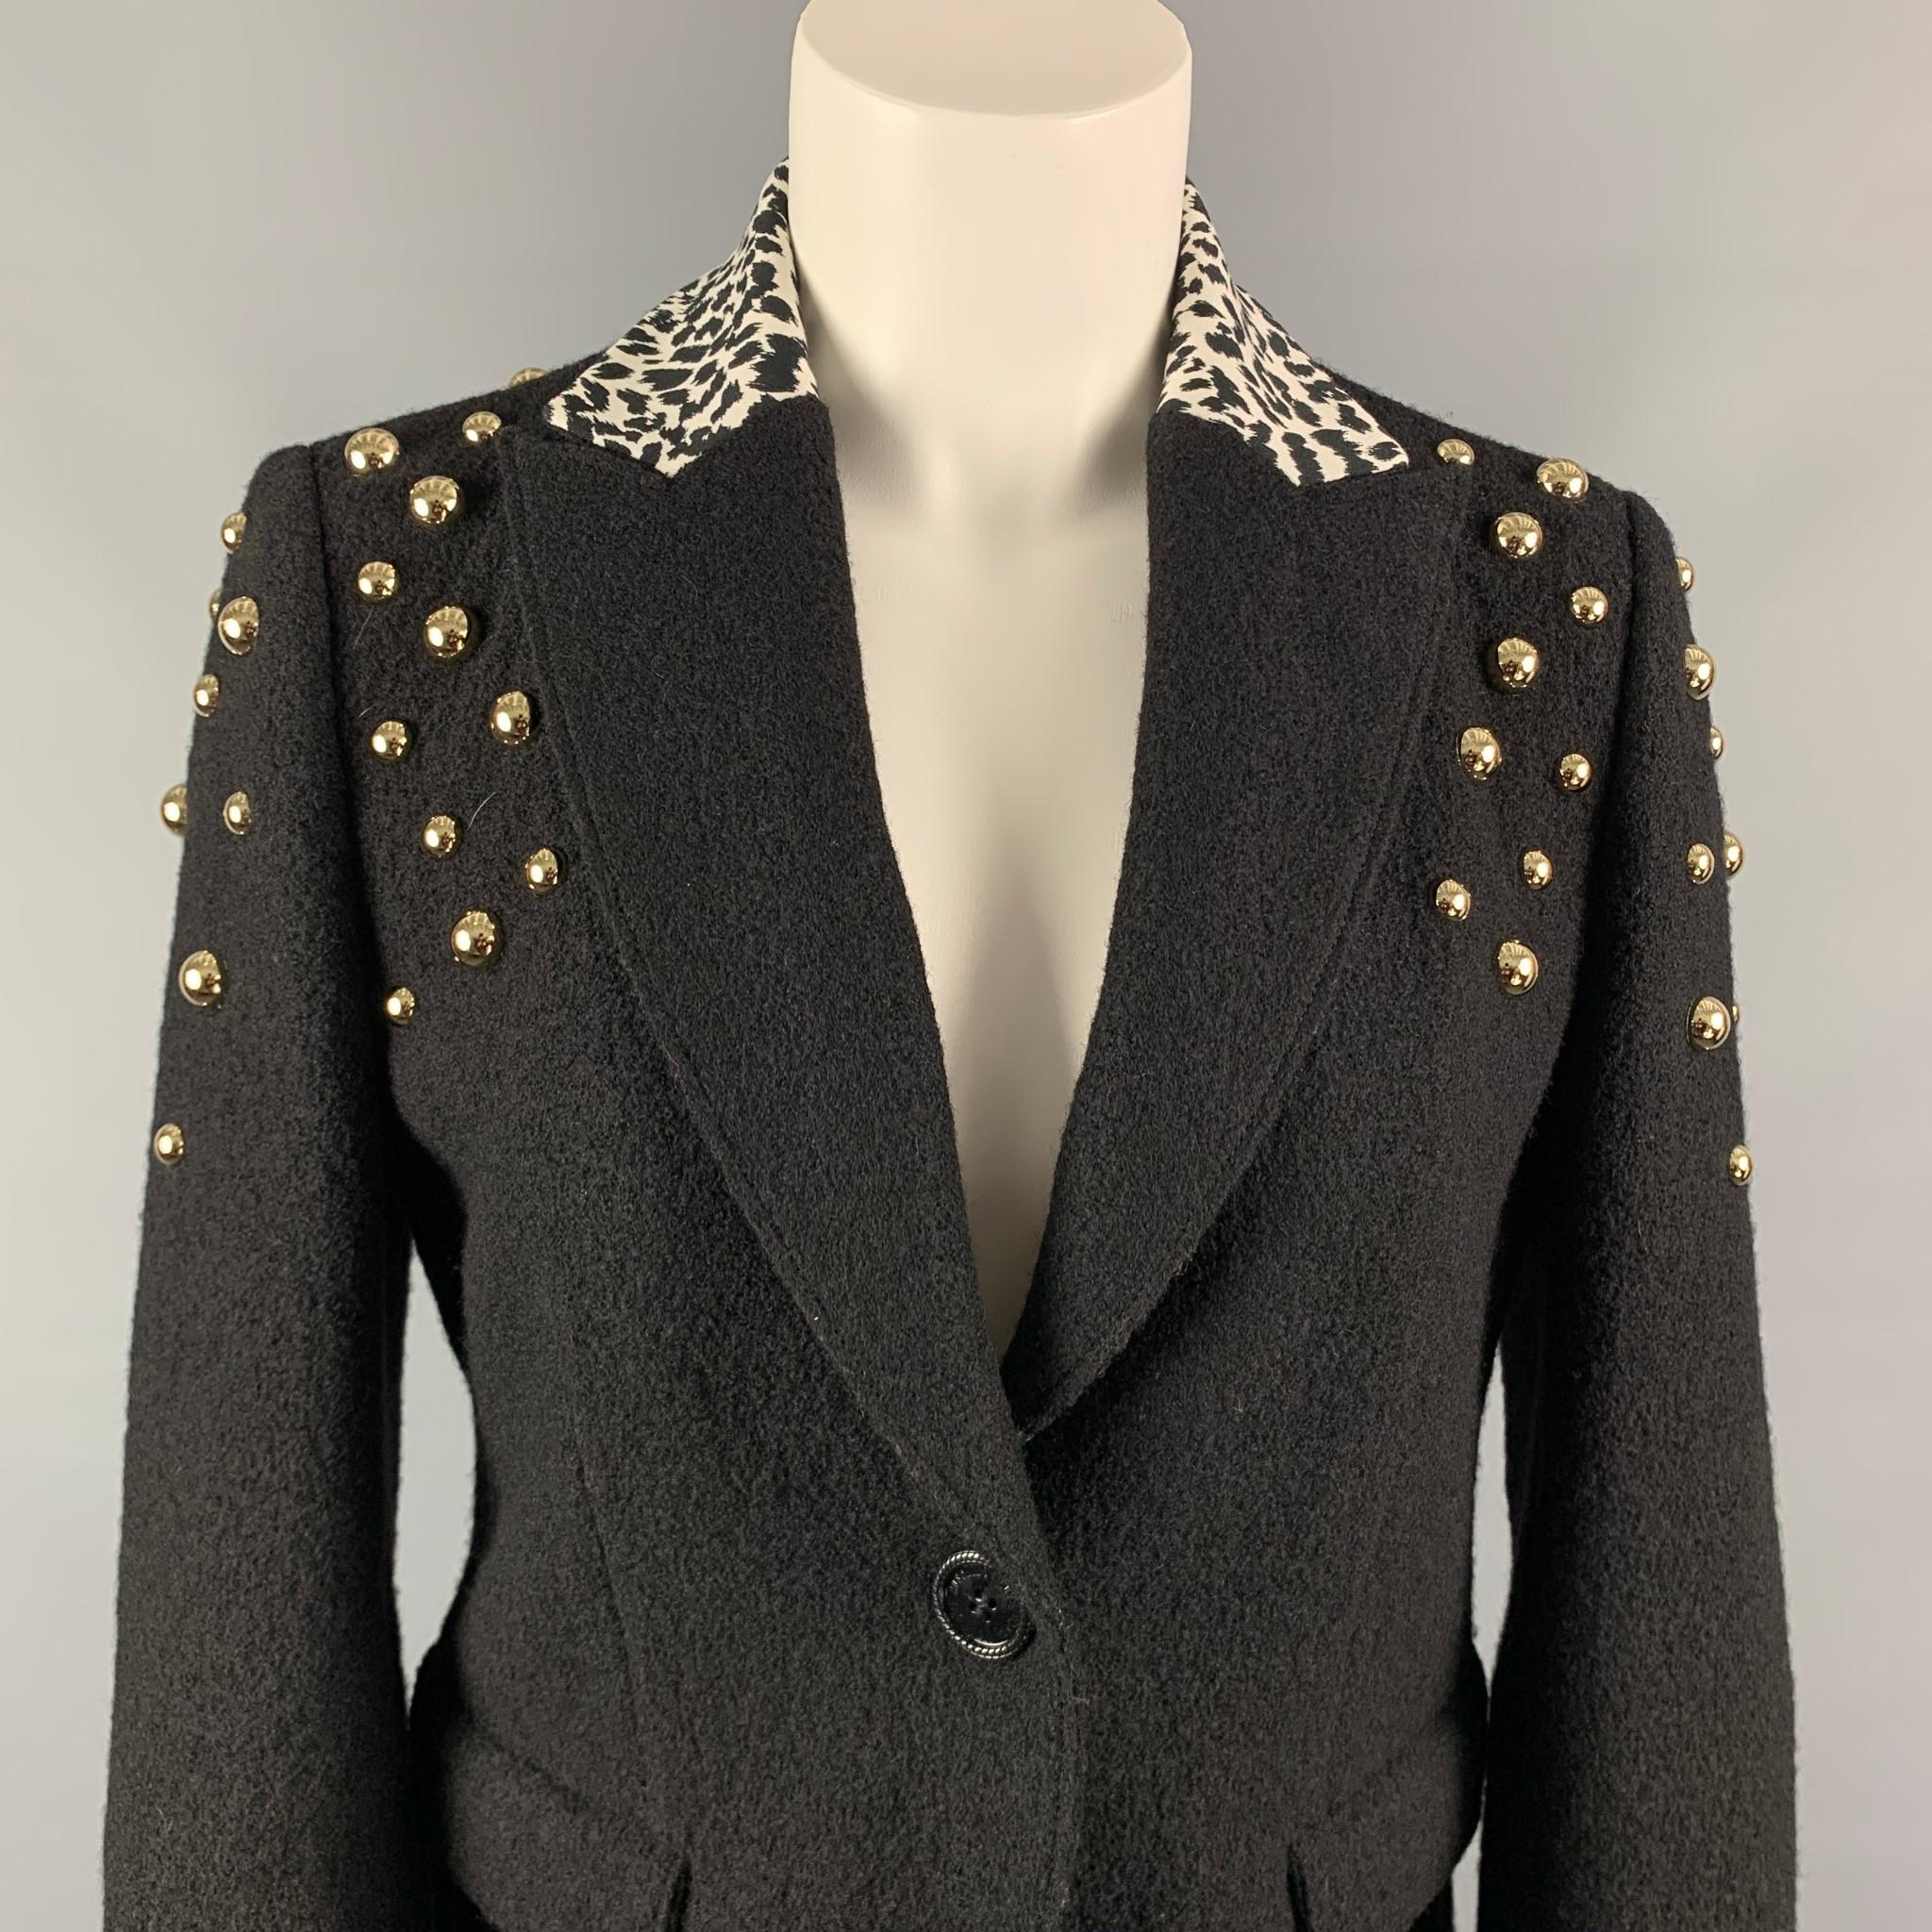 LOVE MOSCHINO jacket comes in a black wool with a white animal print peak lapel collar featuring a half liner, studded details, flap pockets, and a single button closure.

Very Good Pre-Owned Condition.
Marked: D 38 / GB 10 / F 38 / USA 6 / I